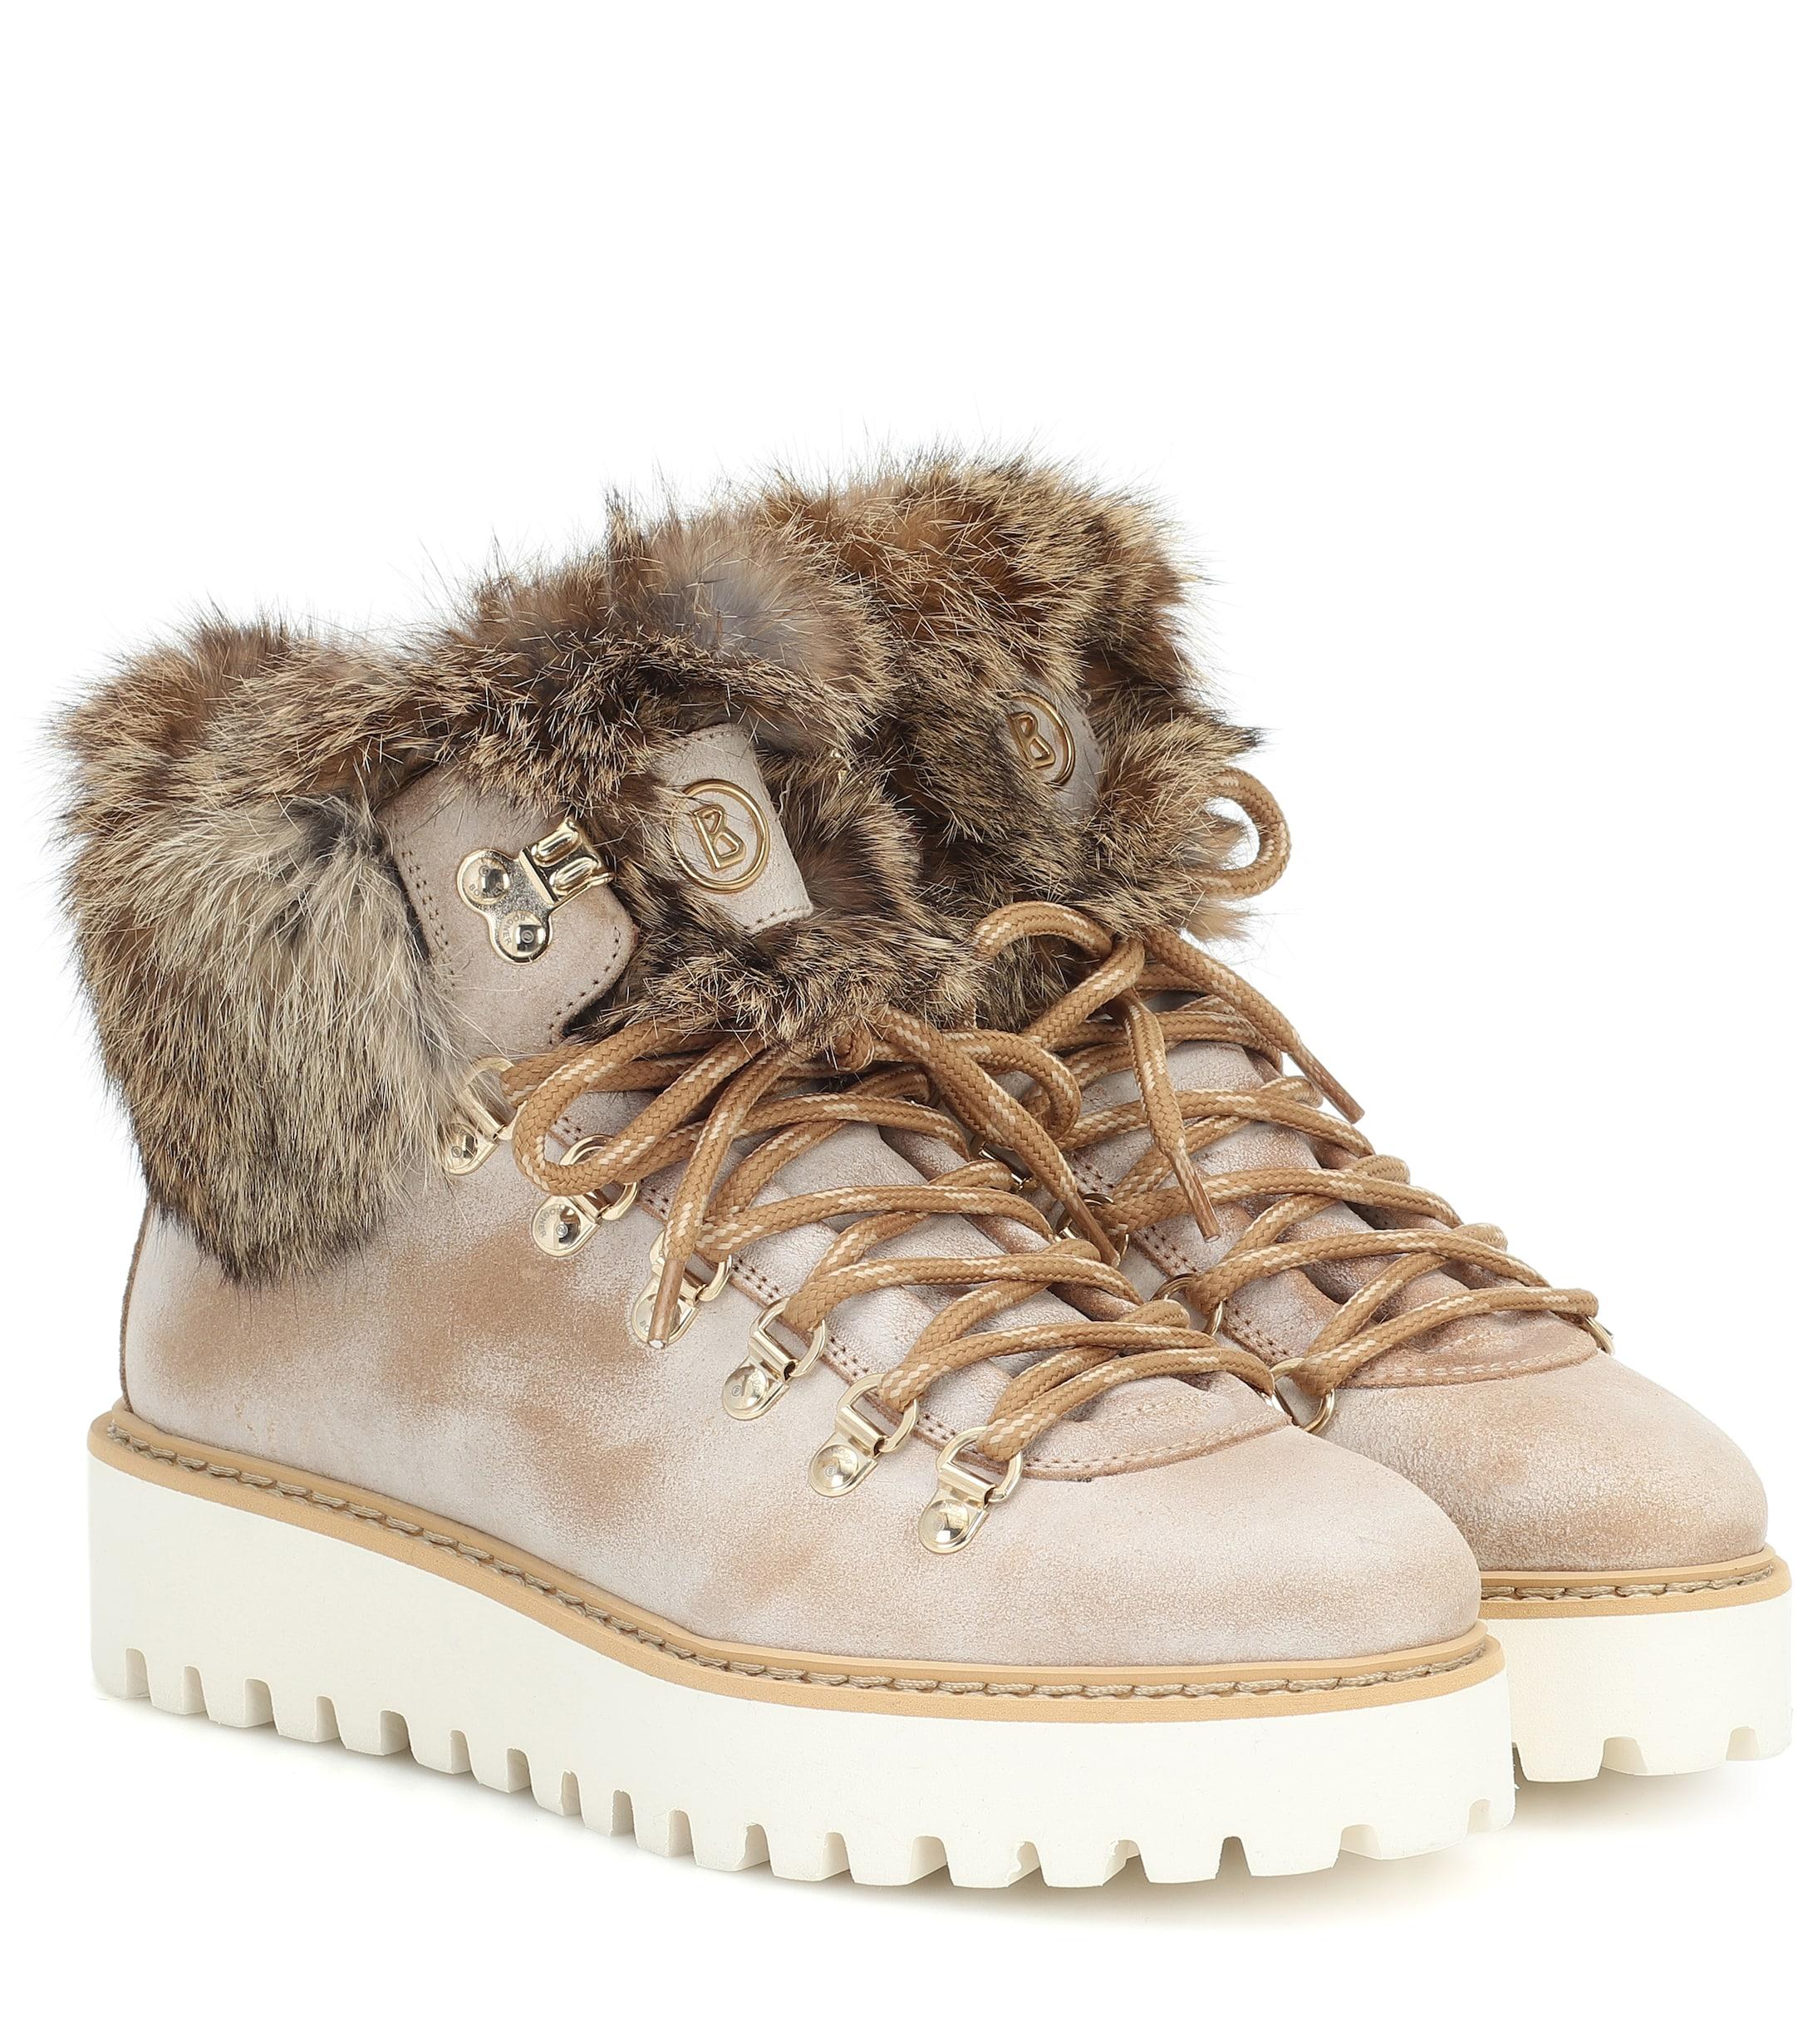 Bogner Oslo Fur-trimmed Leather Snow Boots in Beige (Natural) - Lyst